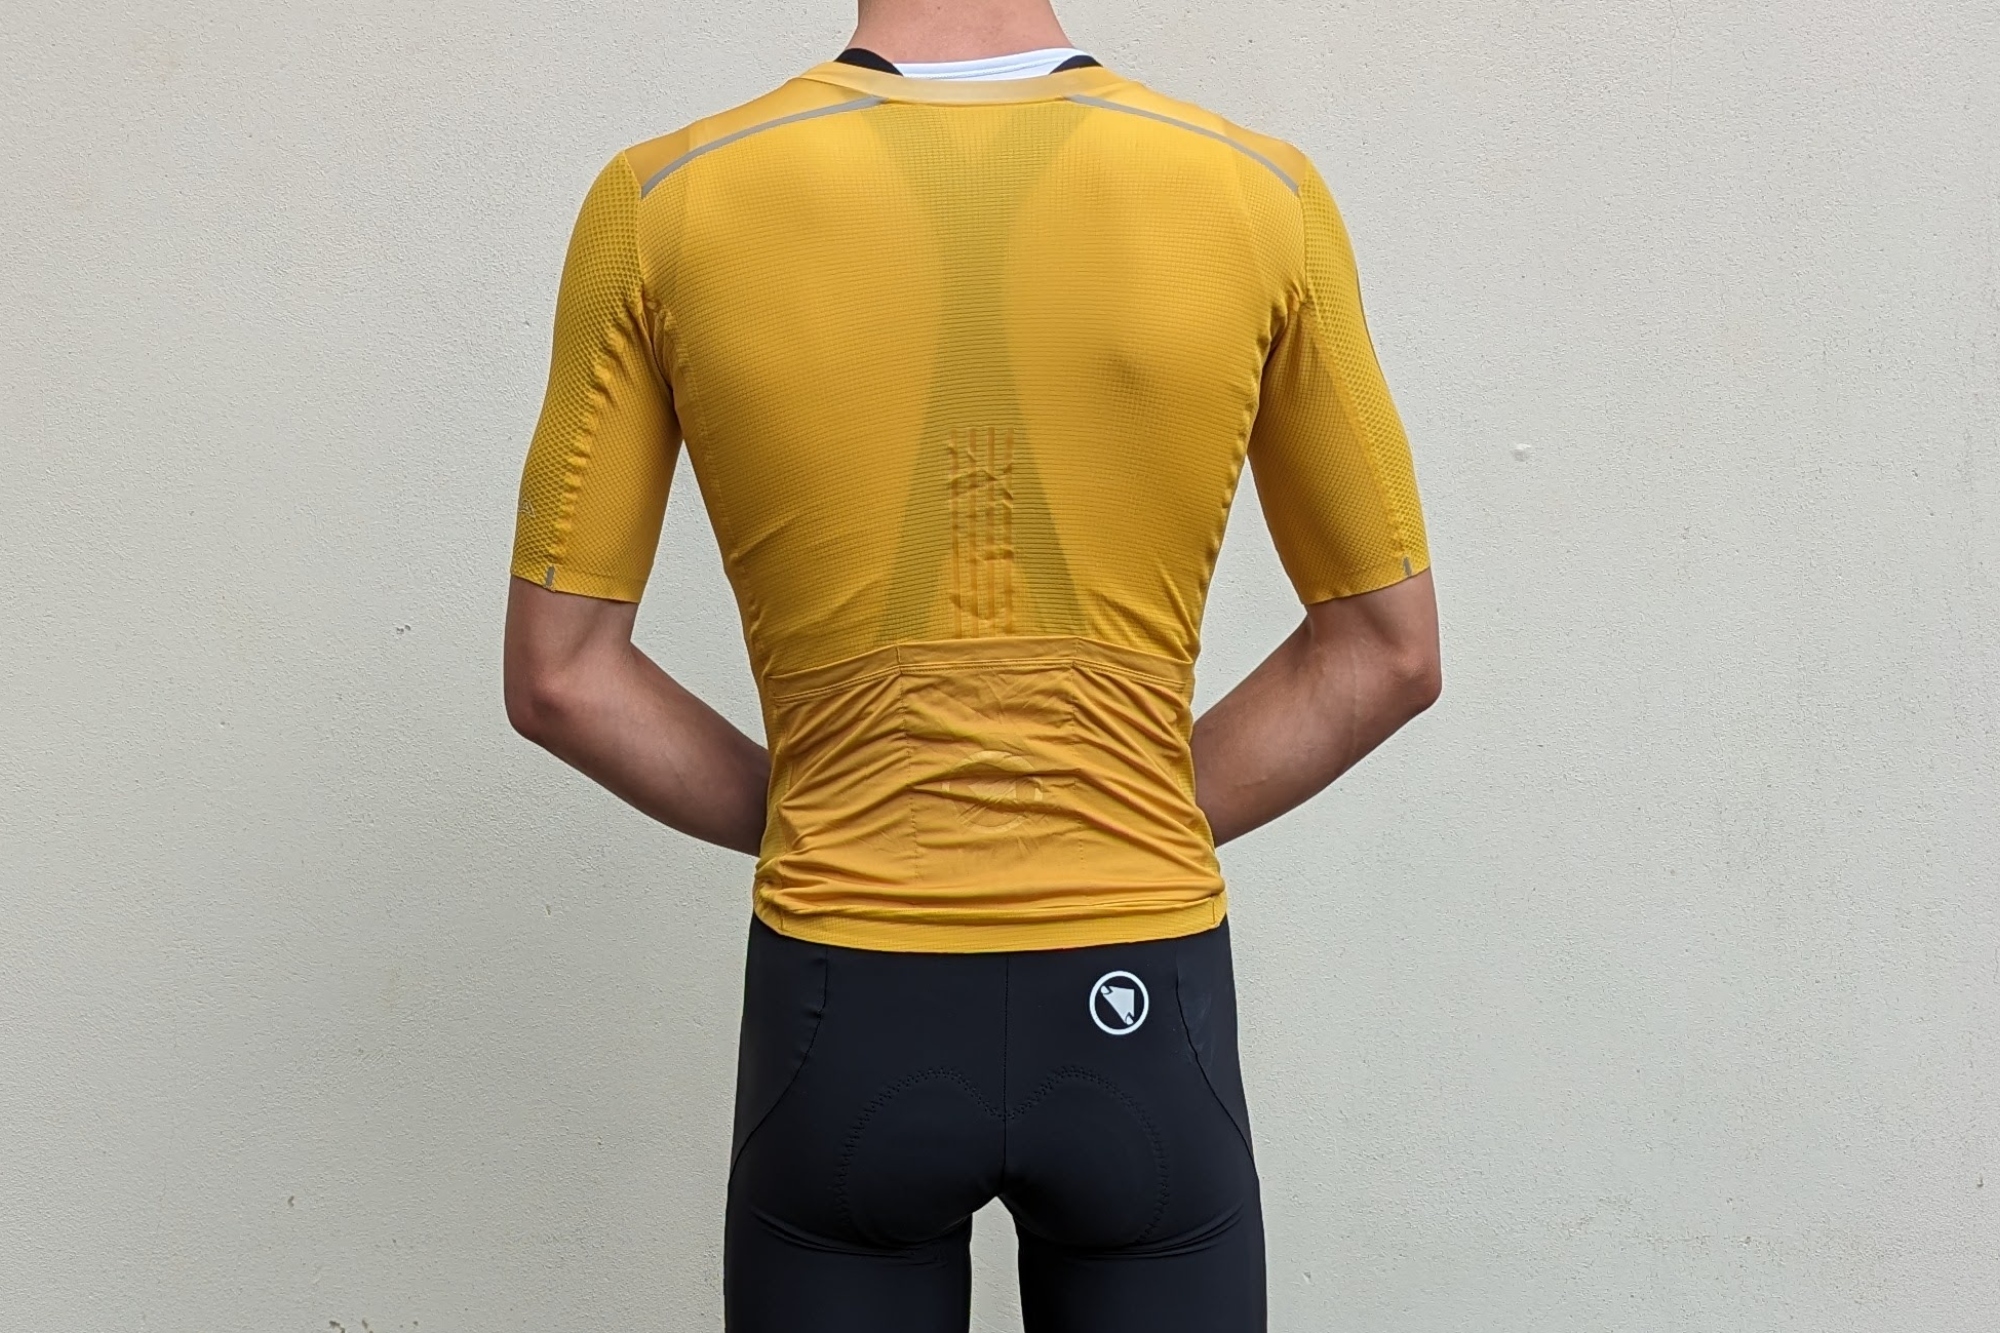 Endura Pro SL race jersey being worn rear on shot against white wall